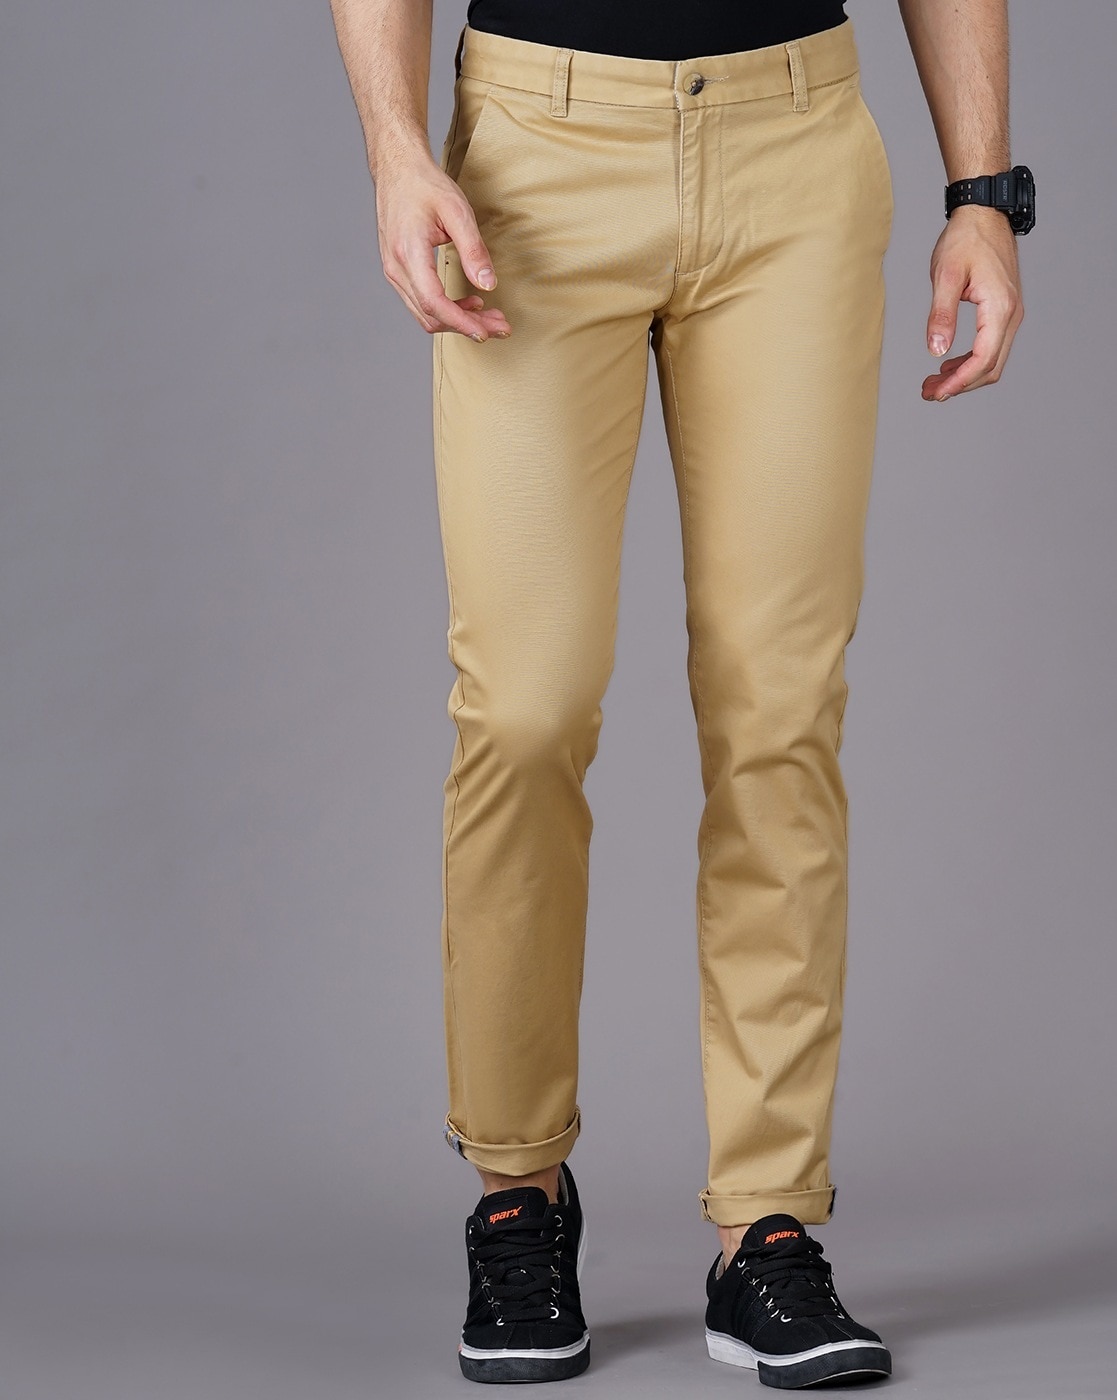 GO COLORS Women's Regular Fit Cotton Pants (8904289875330_Yellow_S) :  Amazon.in: Fashion